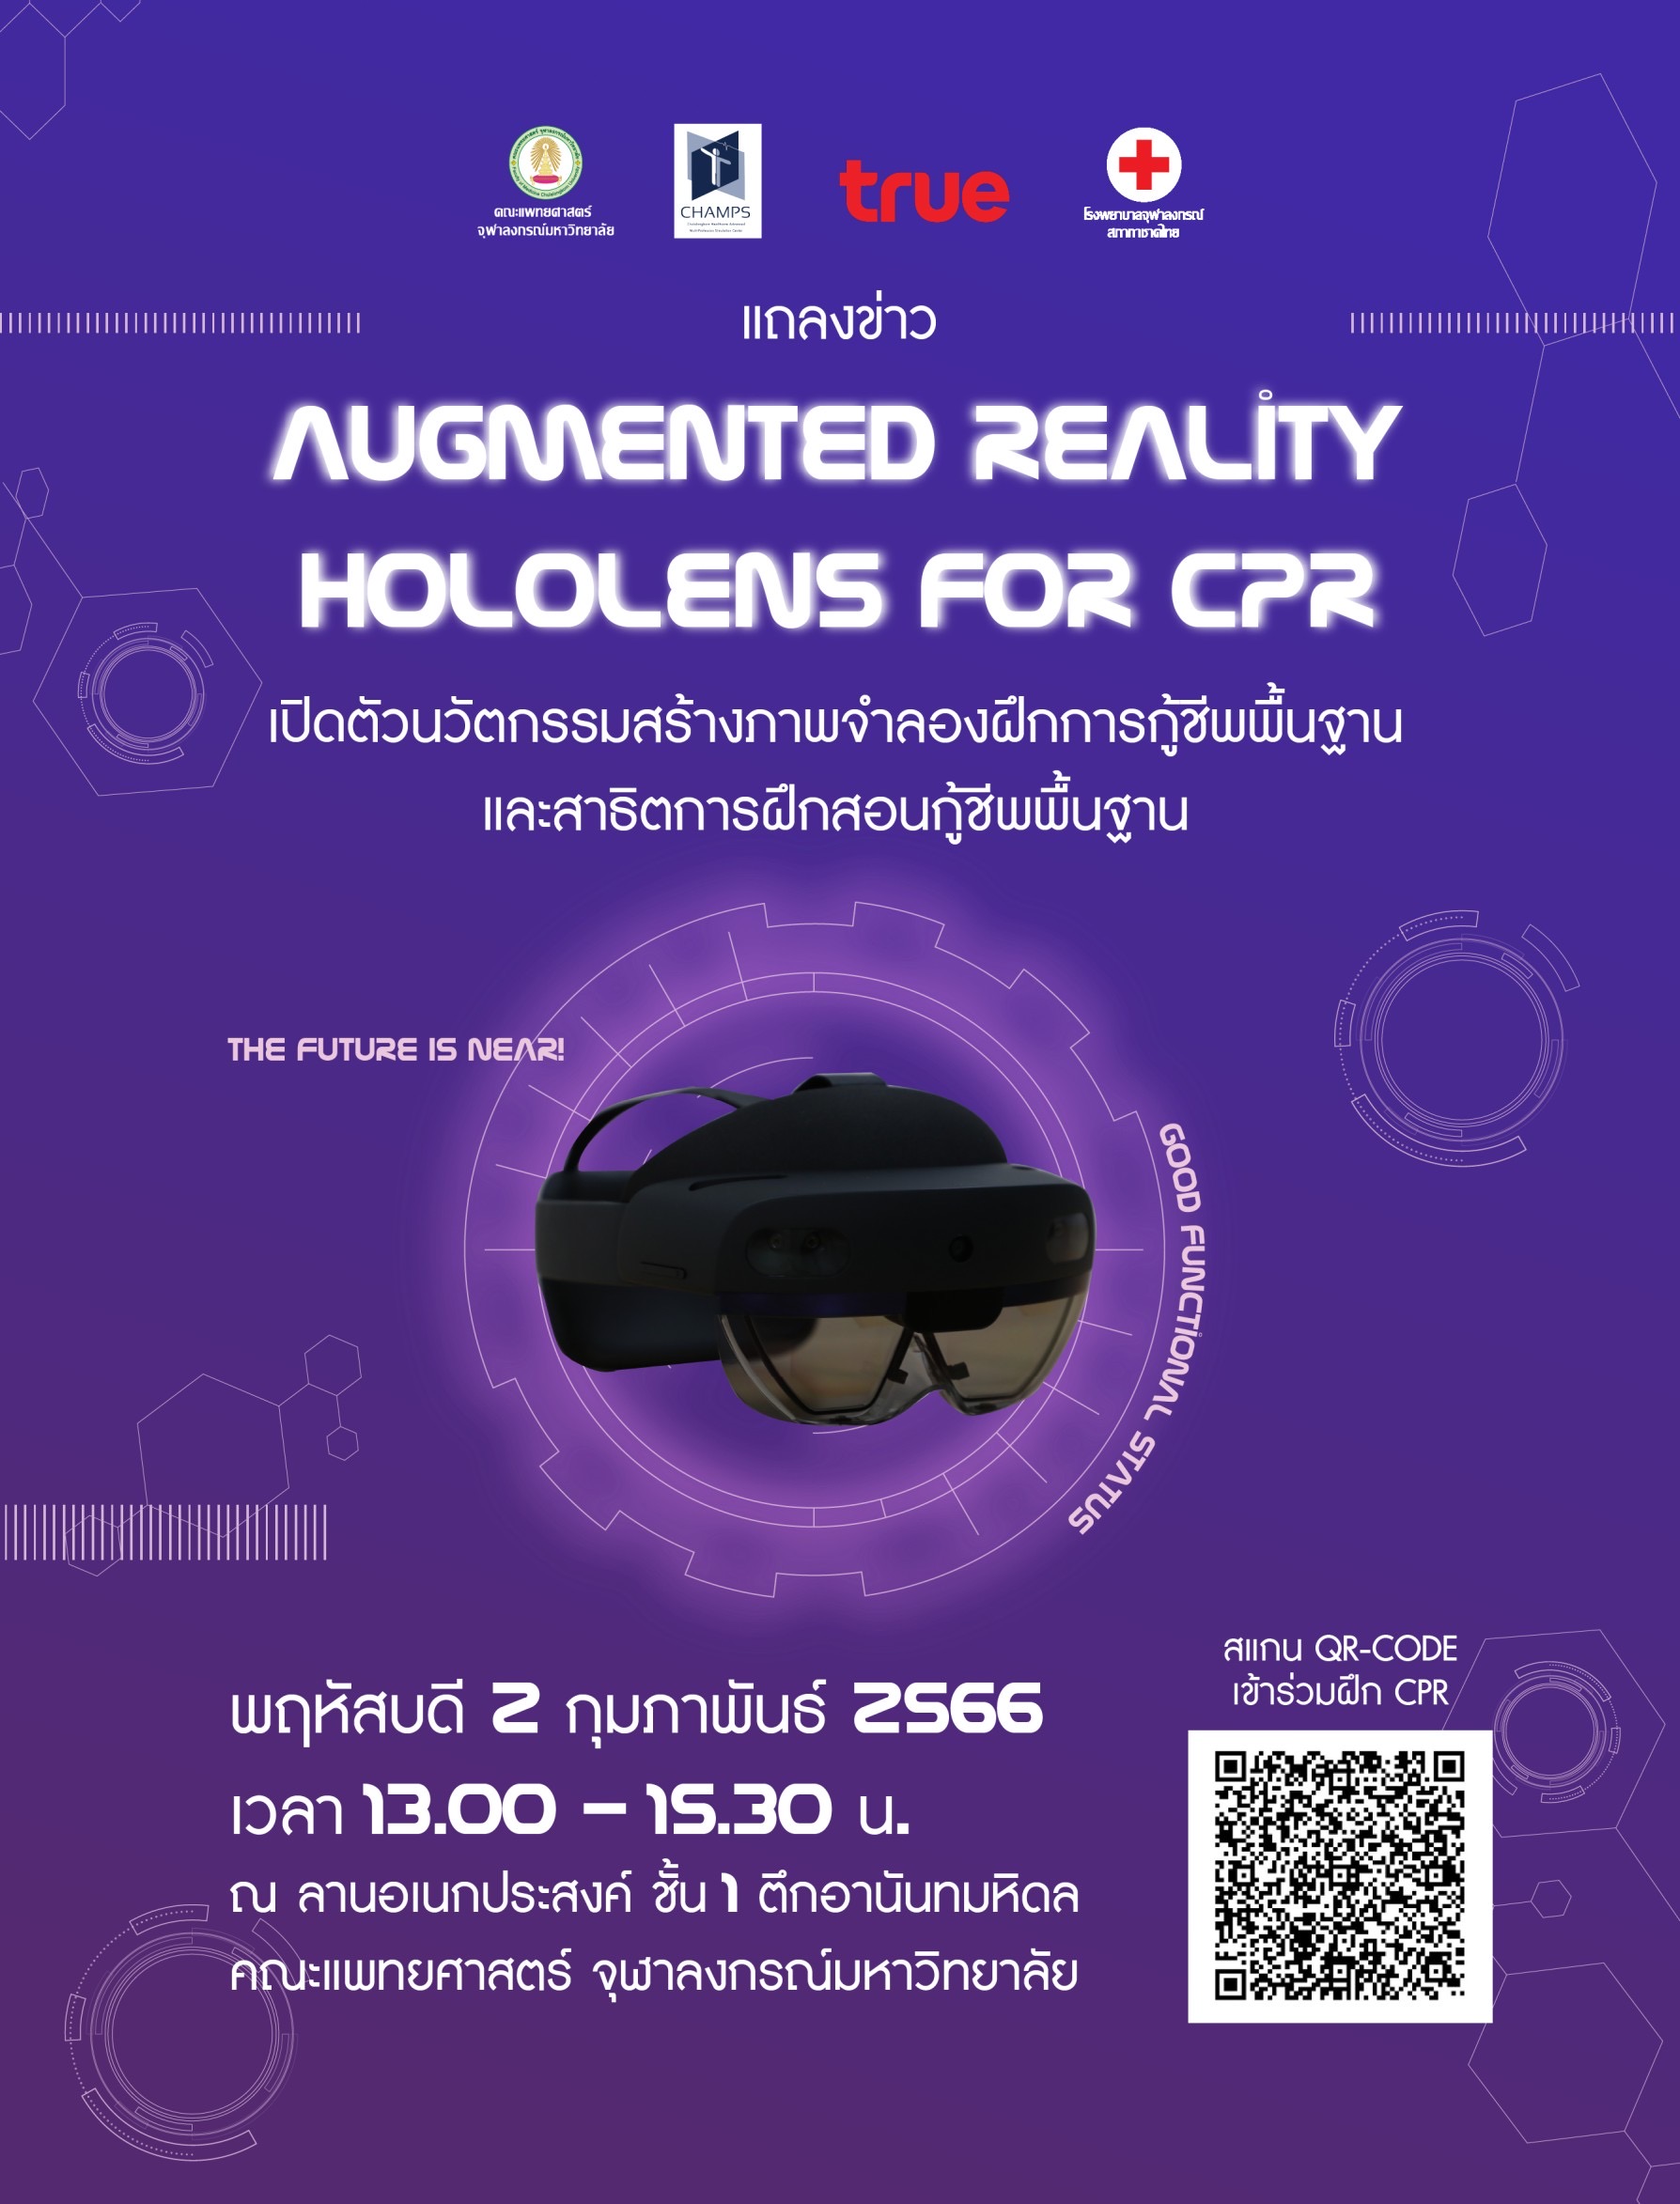 Augmented Reality Hololens for CPR